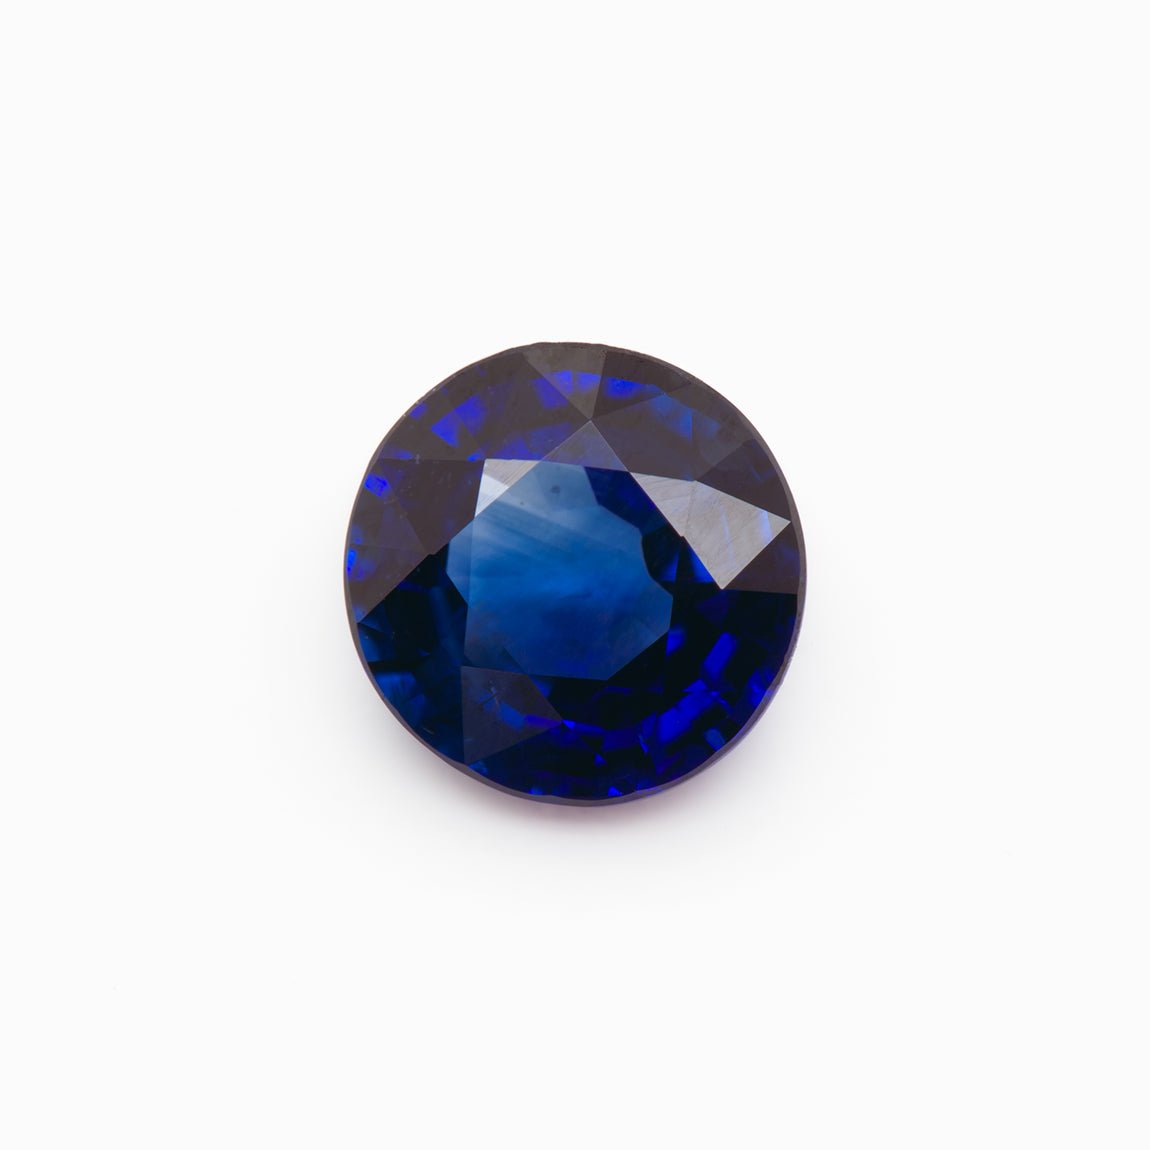 [SOLD] 5.2mm Round Madagascan Sapphire Certificated (SAR110)